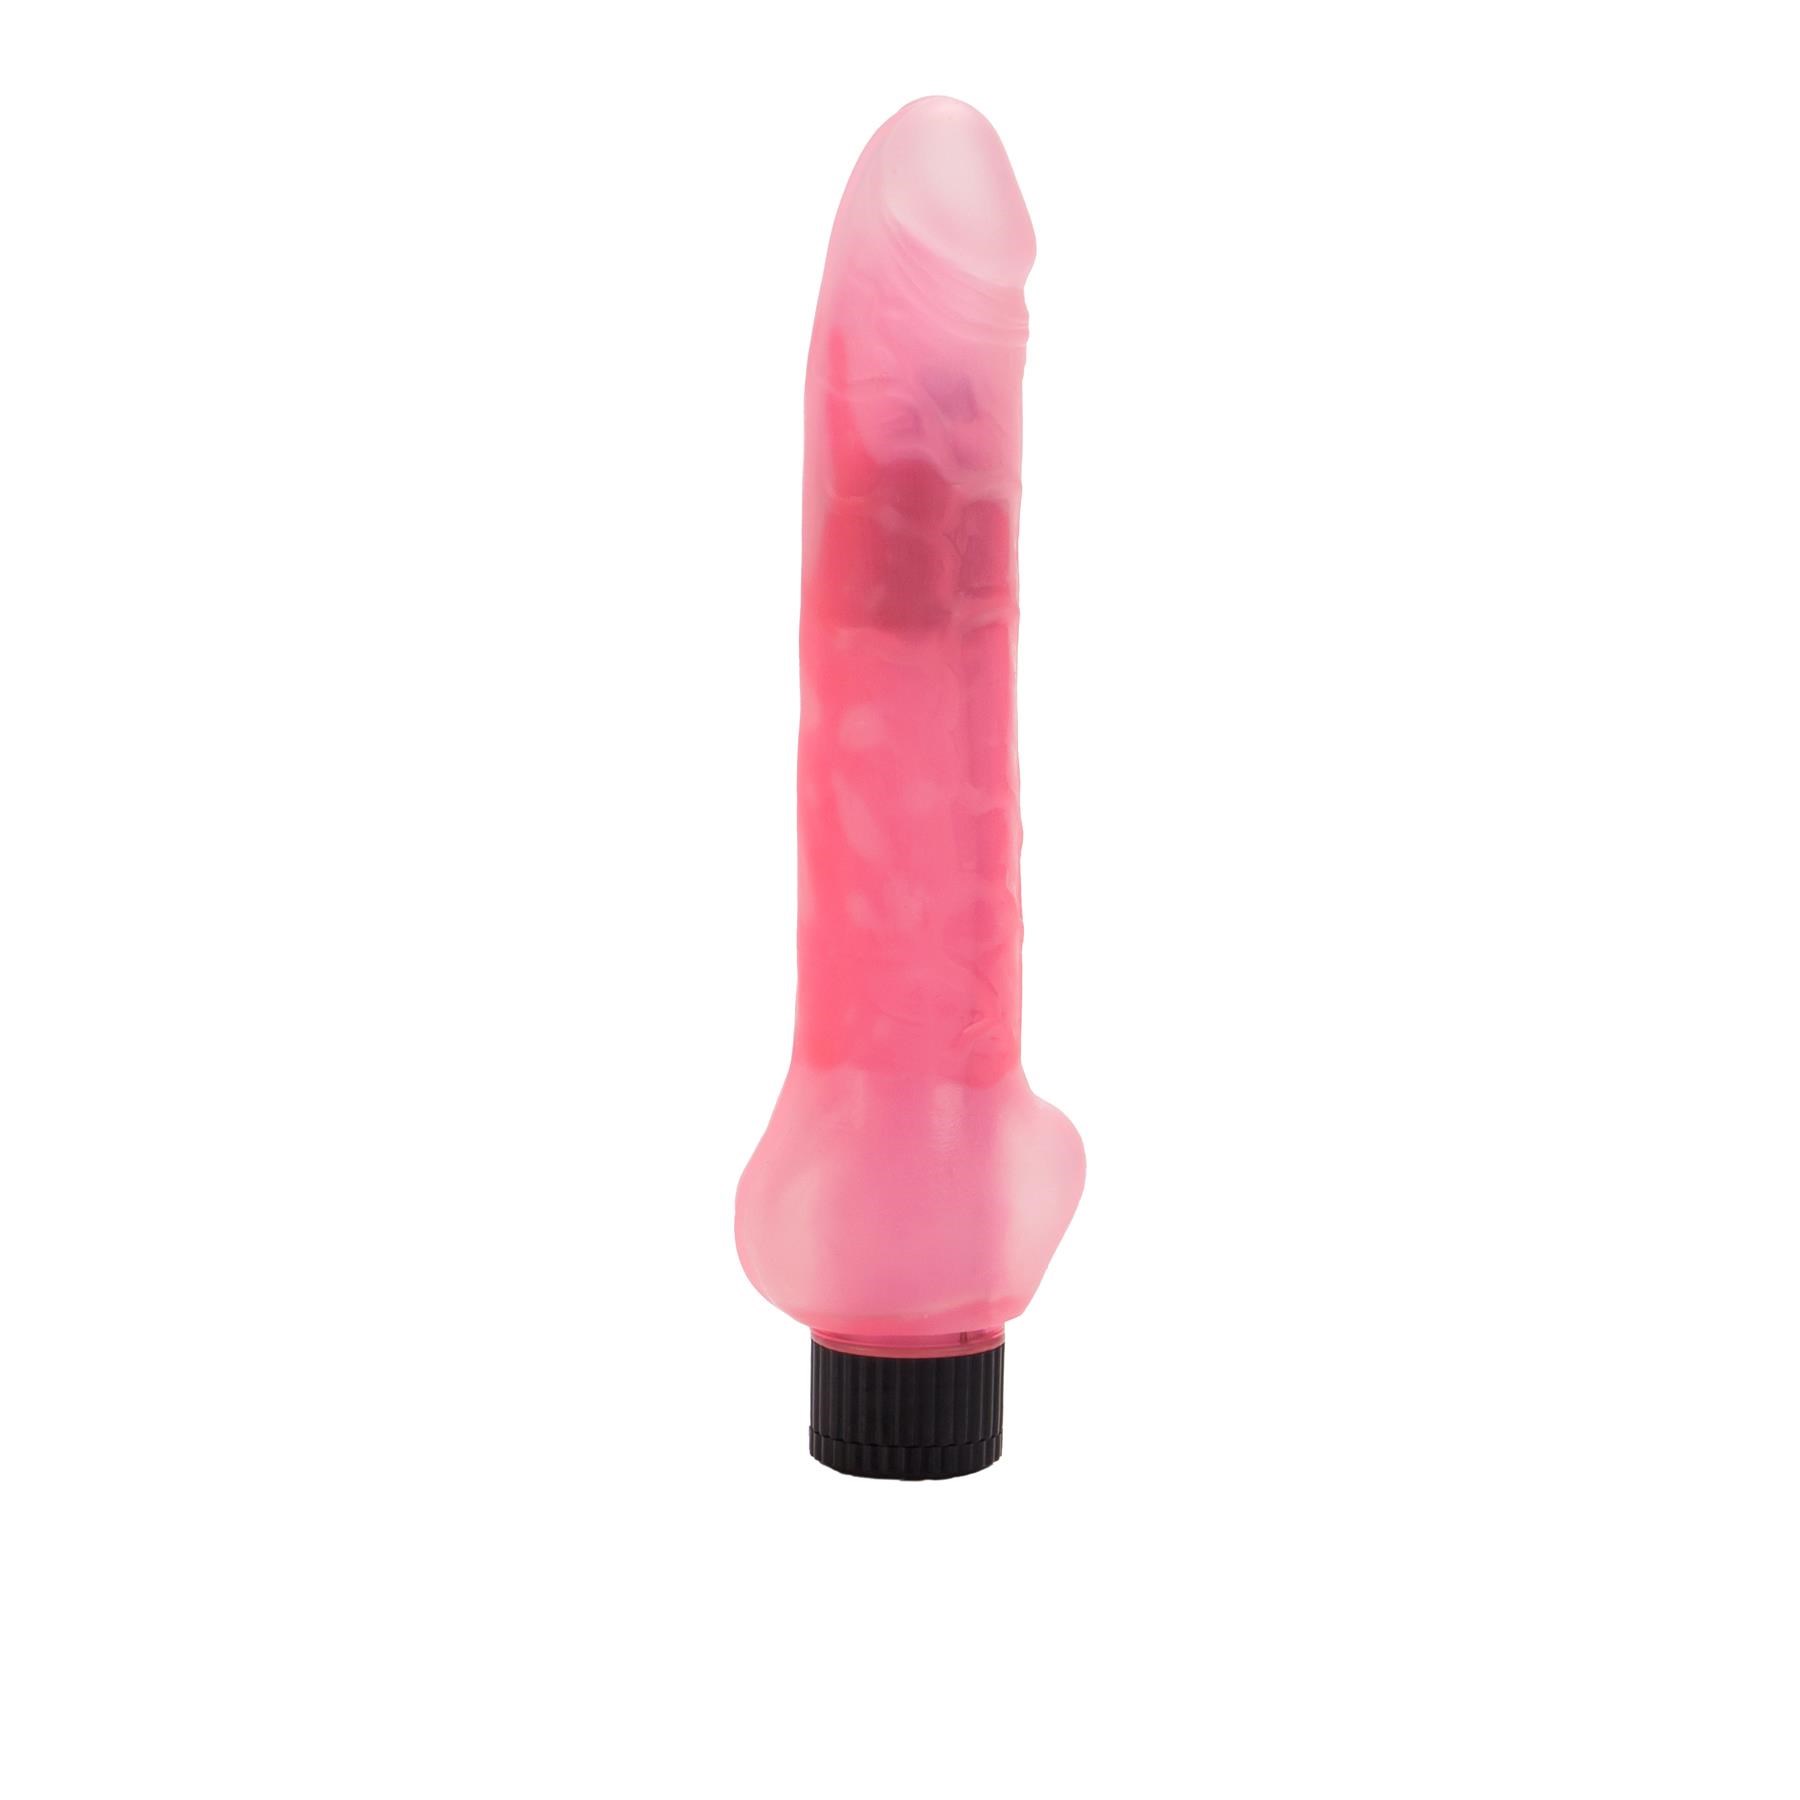 The Lover's Kit - Vibrator with Sleeve